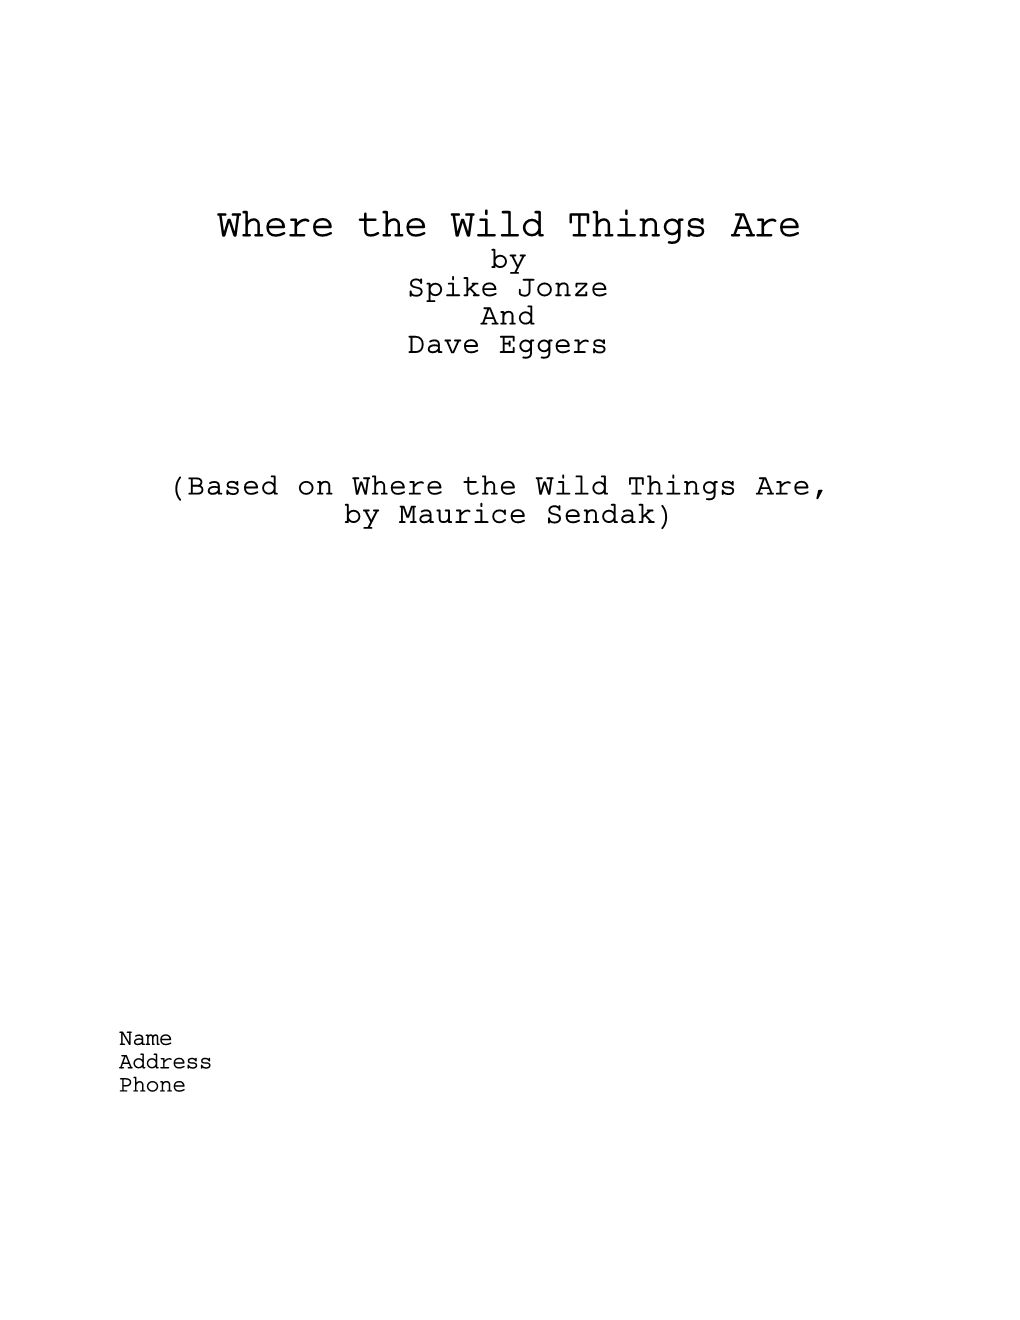 Where the Wild Things Are by Spike Jonze and Dave Eggers